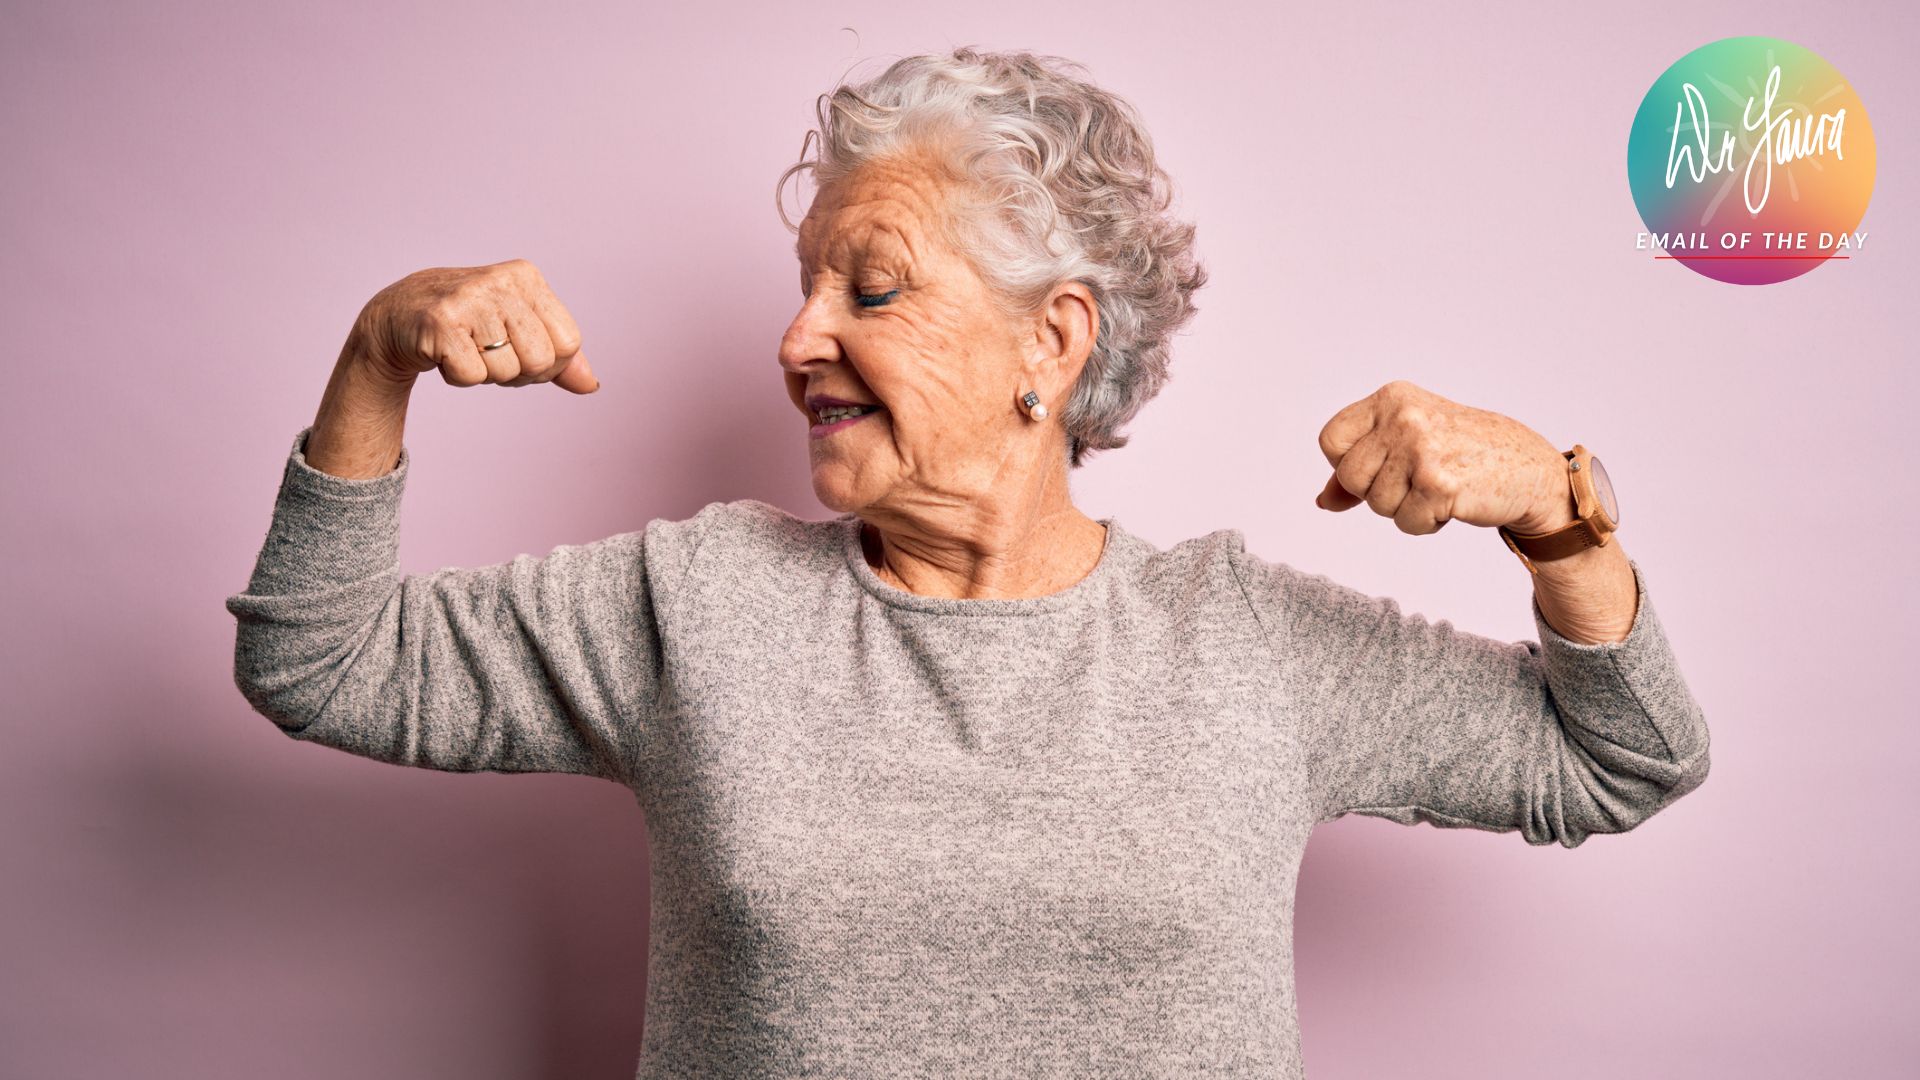 Email of the Day: Don't Let Age Stop You From Your Goals